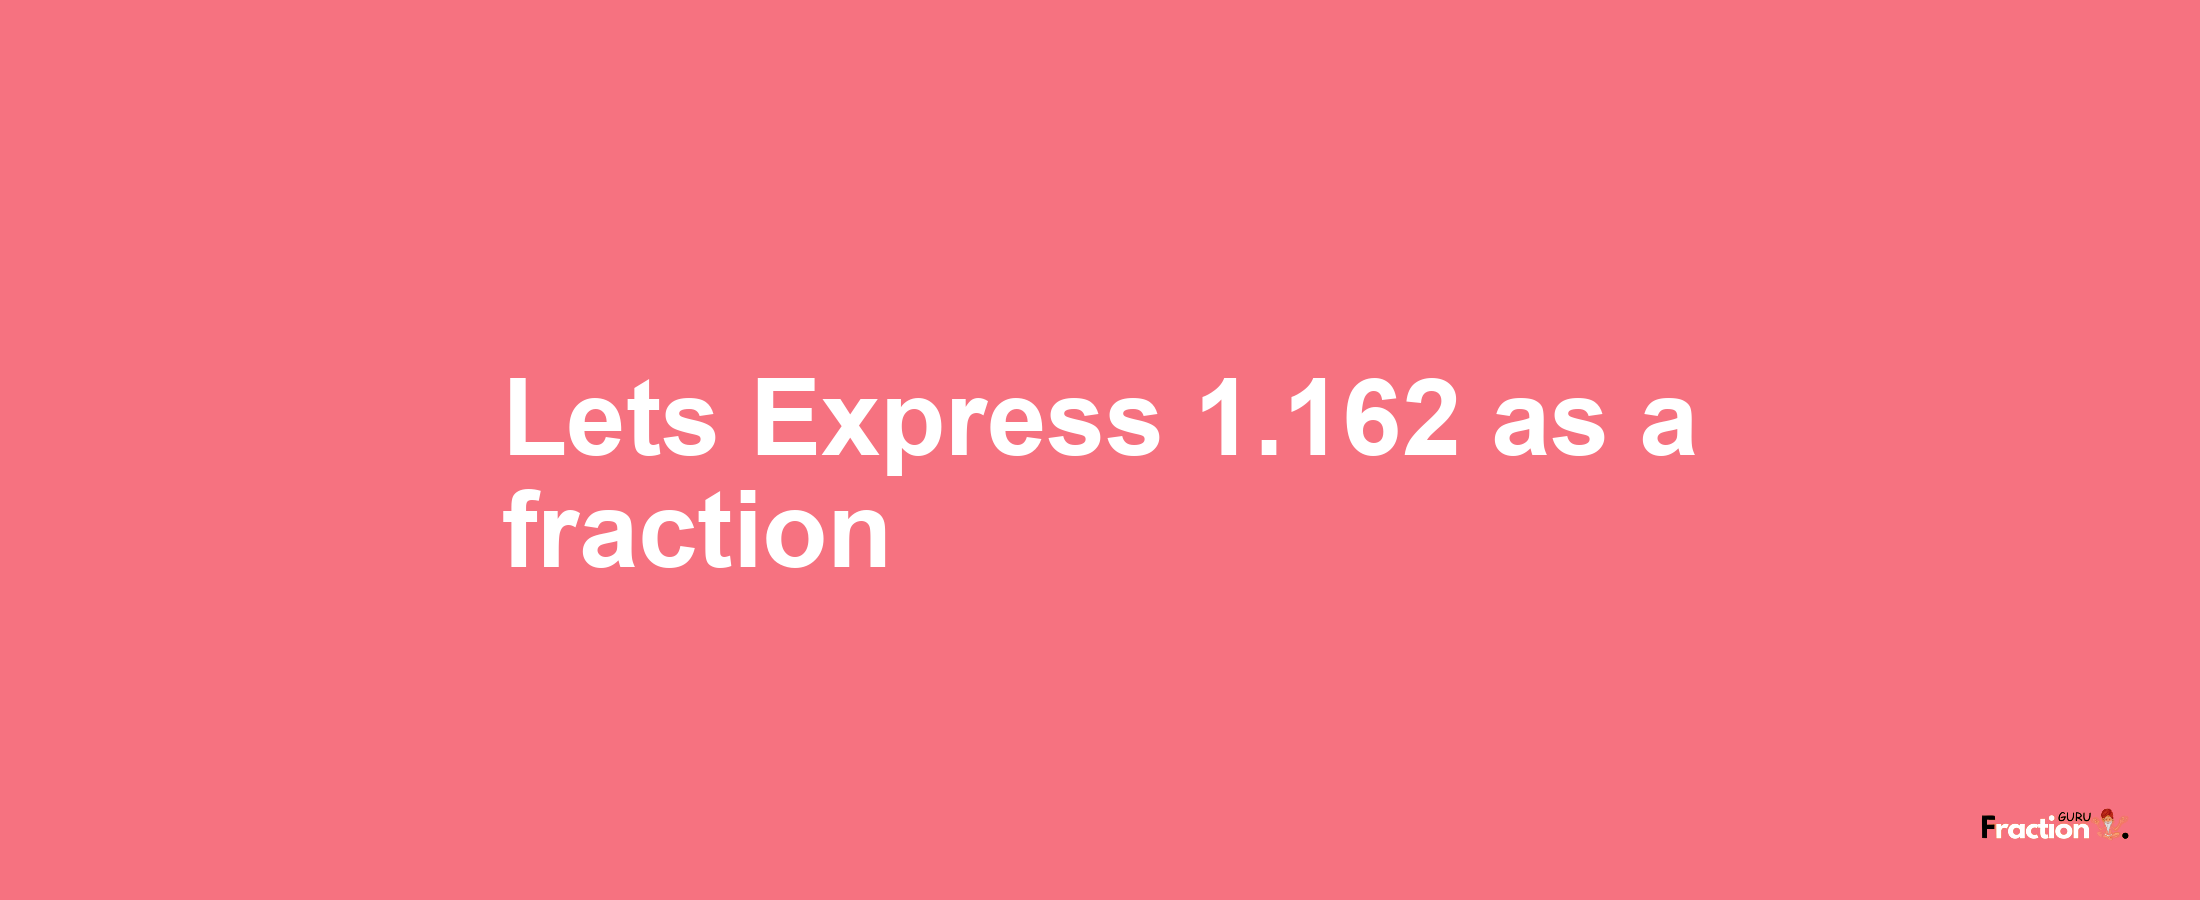 Lets Express 1.162 as afraction